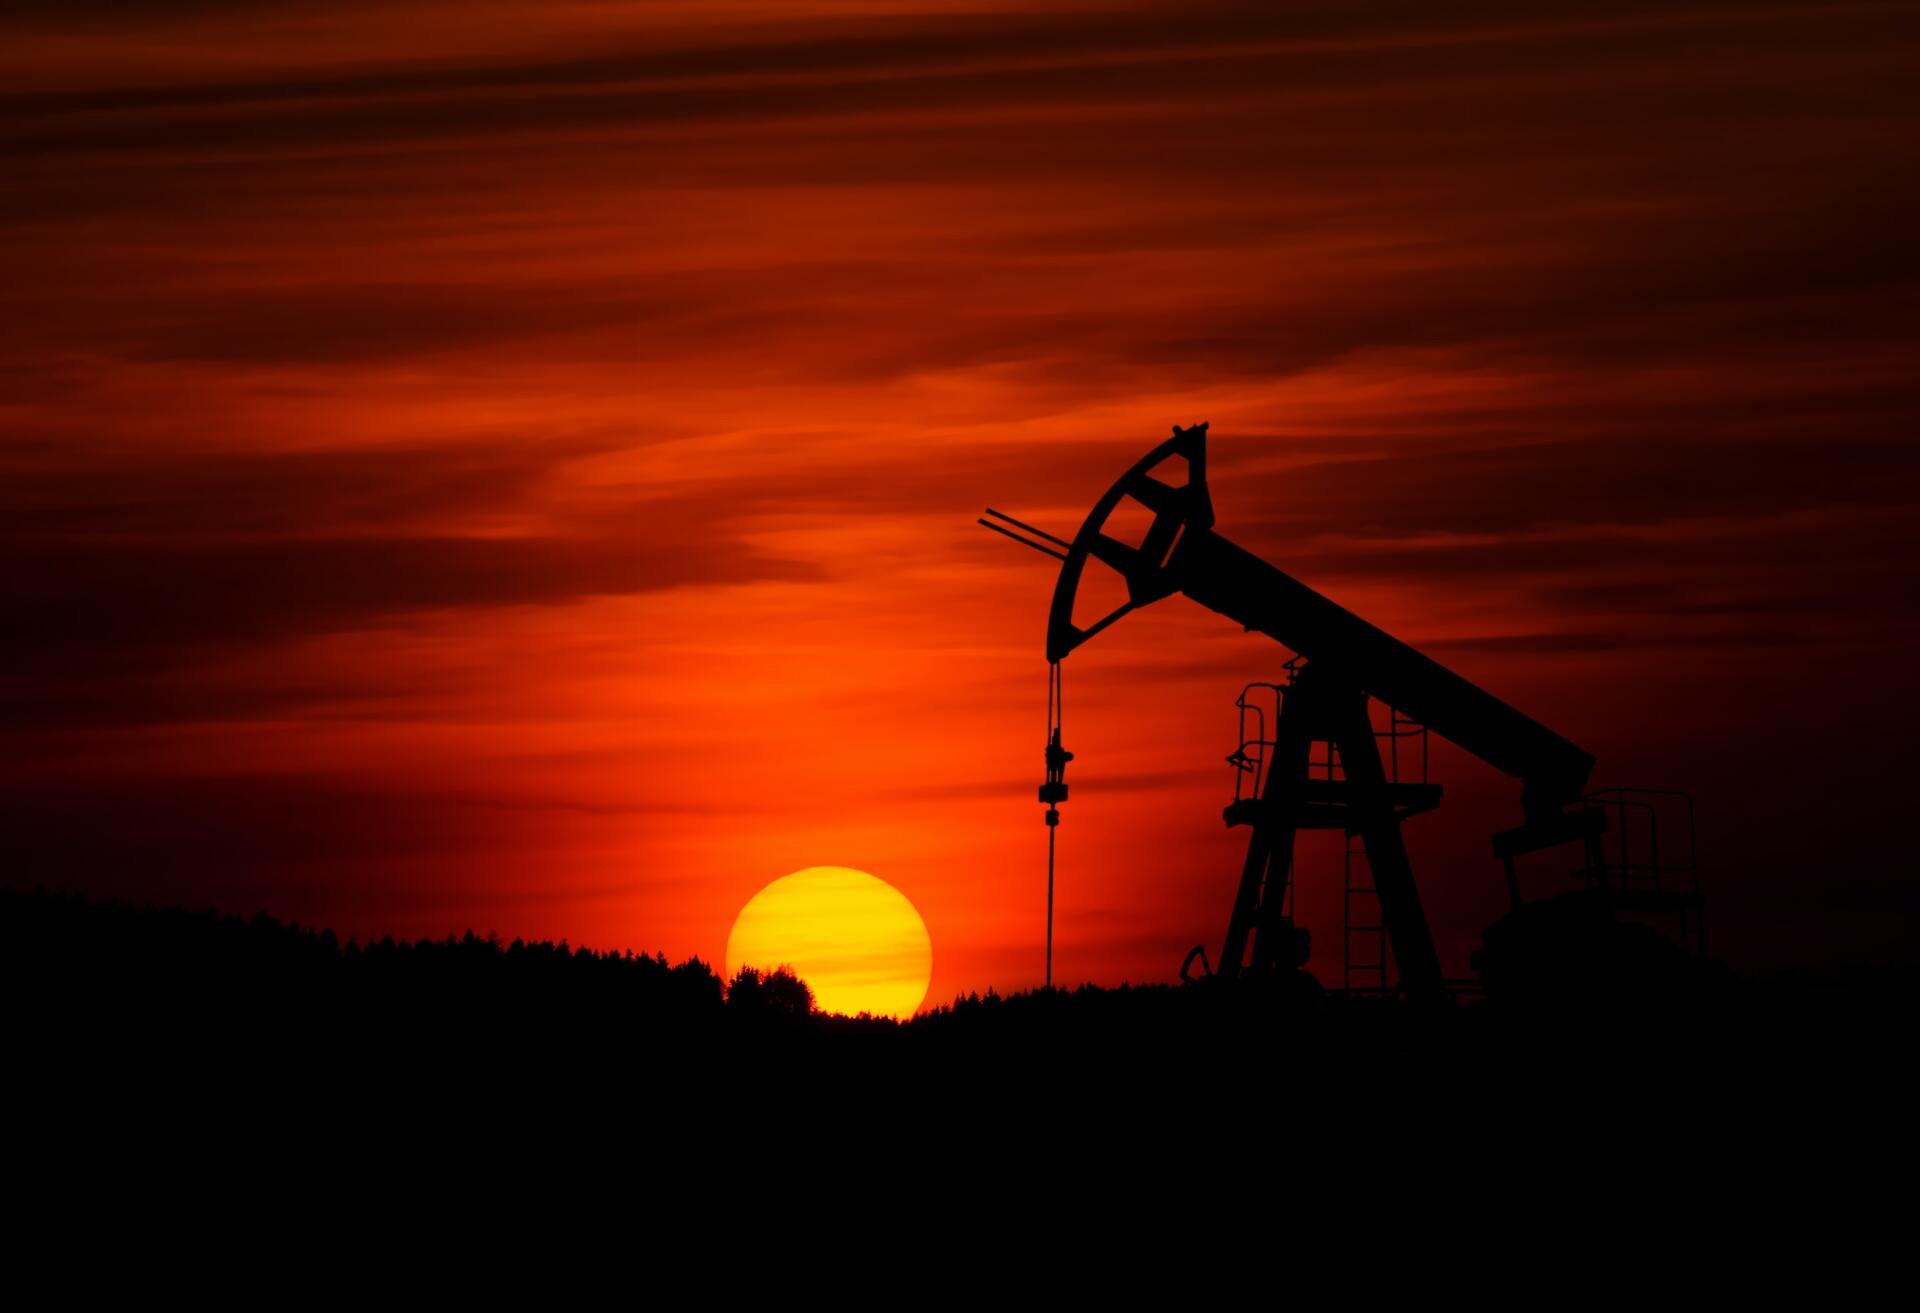 Sunset with oil pumps in silhouette